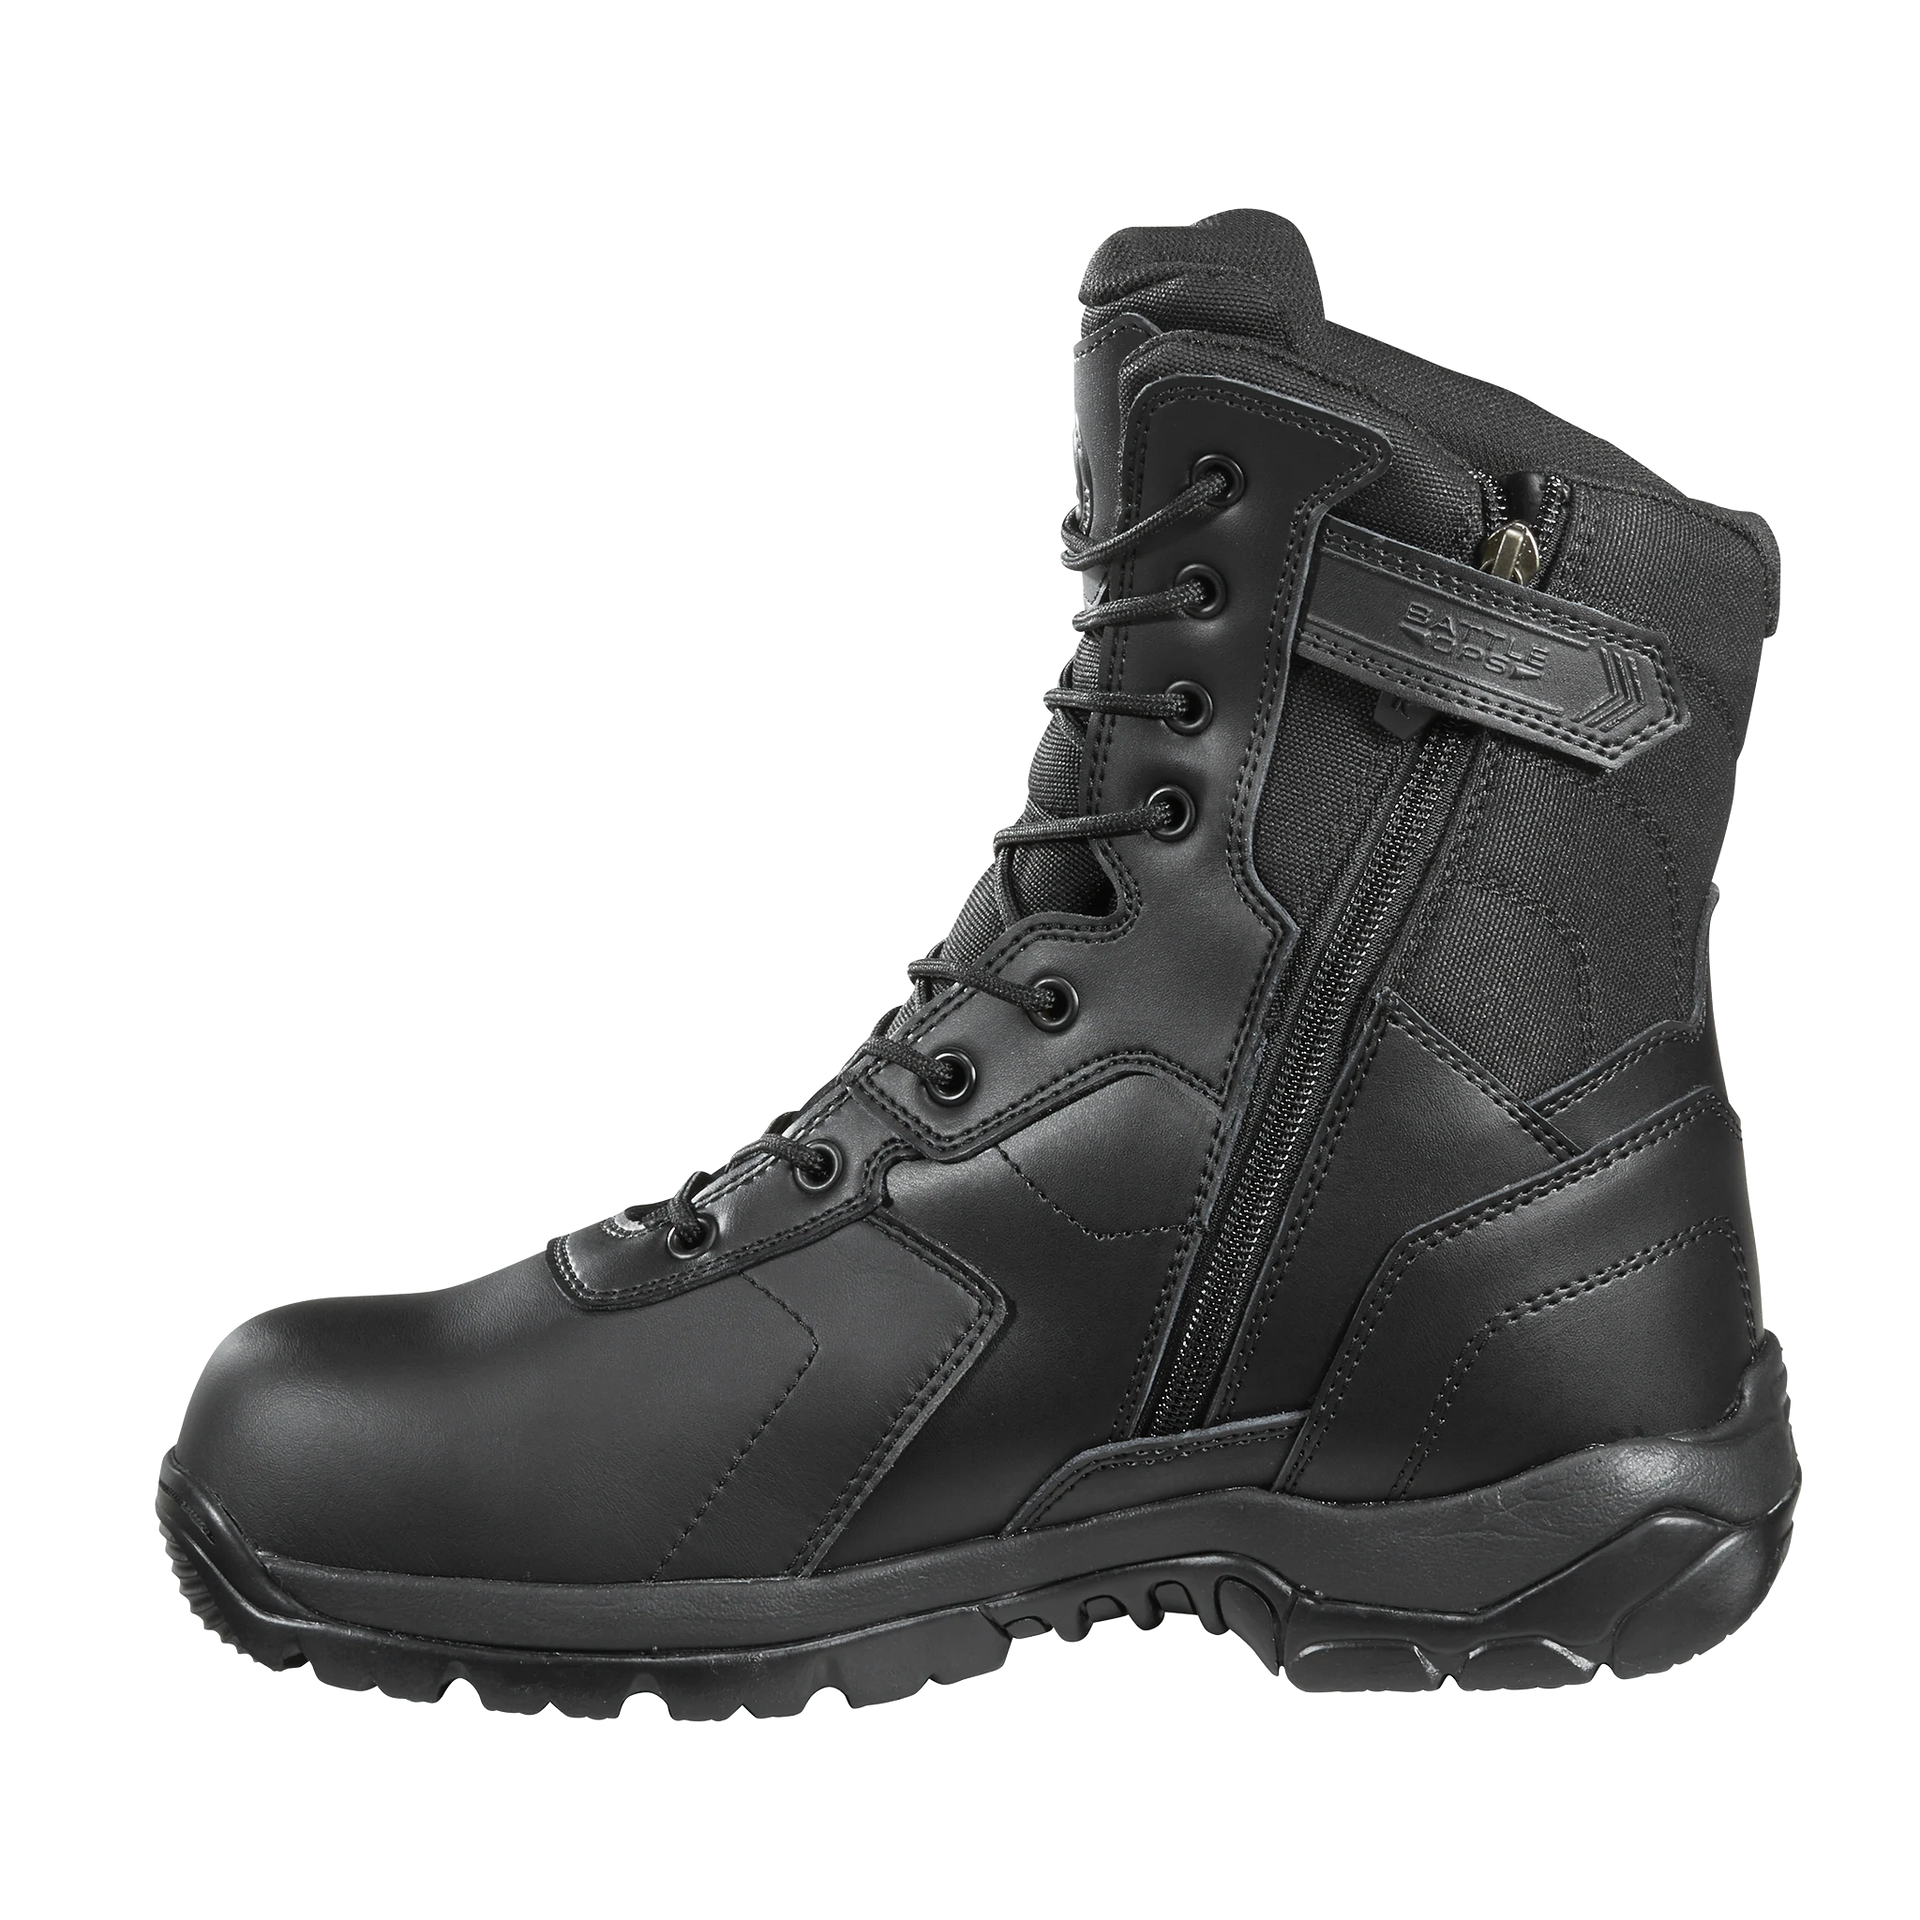 Black Diamond Boots Battle Ops 8-inch Side Zip Tactical Boot | The Fire Center | The Fire Store | Store | Fuego Fire Center | Firefighter Gear | Our men's waterproof tactical boot is light and flexible. The EVA mid-sole provides shock absorbing comfort while the fiberglass shank offers support and torsional rigidity. The Battle Ops durable rubber outsole delivers slip resistant traction for any terrain and our removable custom fit footbed provides all day comfort